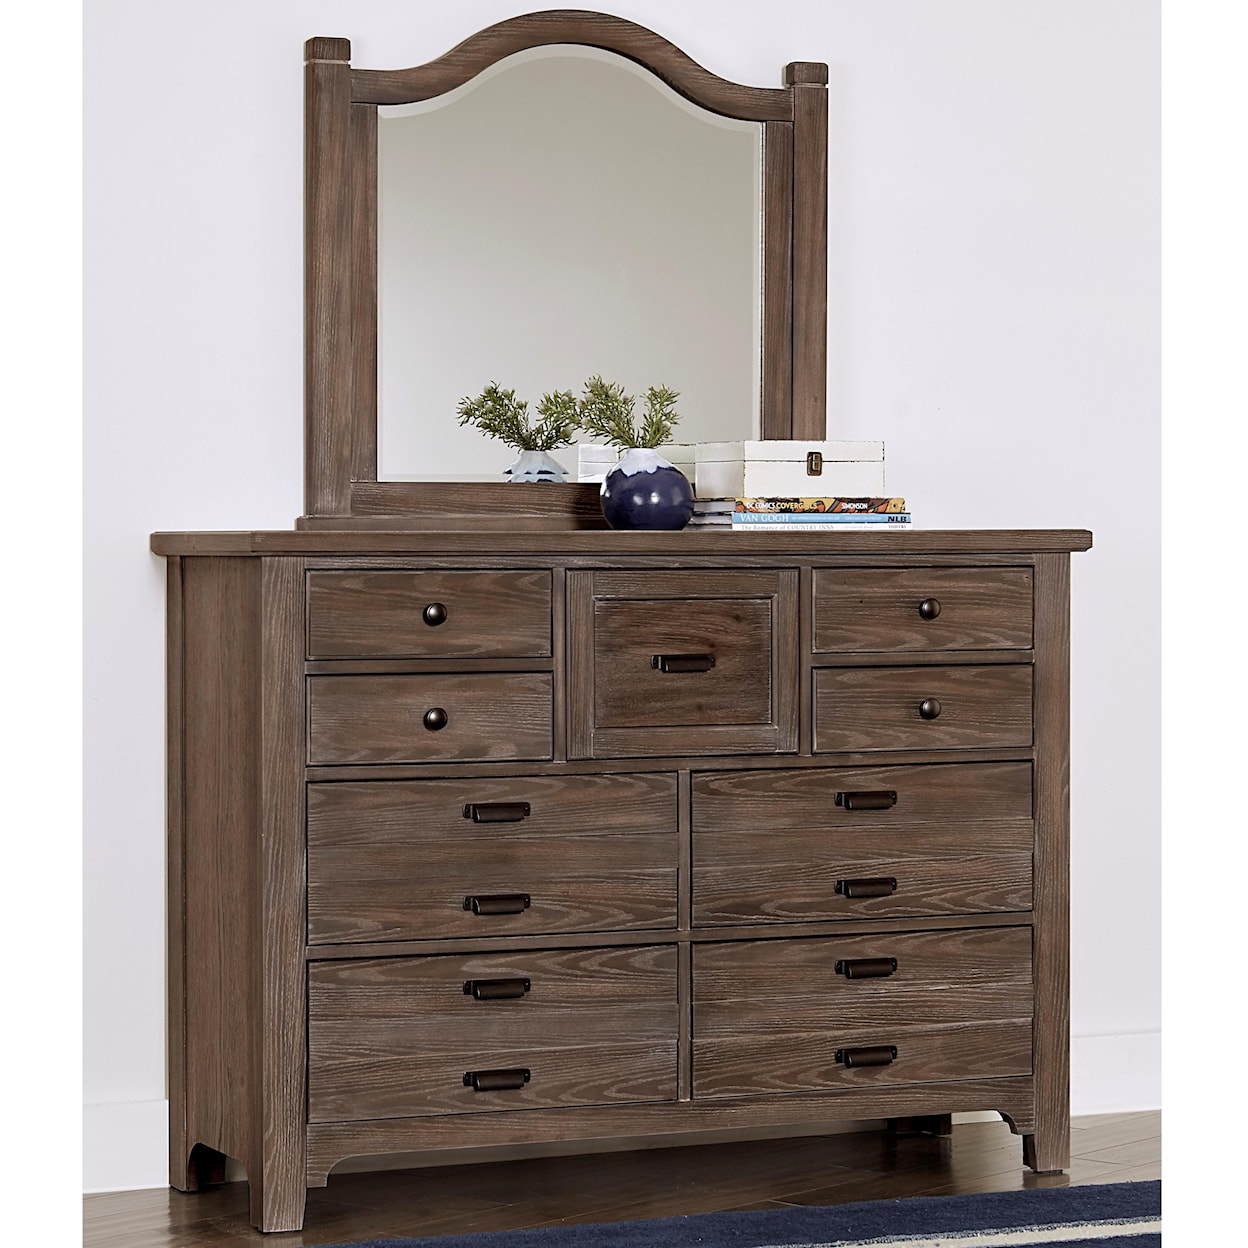 Laurel Mercantile Co. Bungalow Master Dresser with Master Arch Mirror